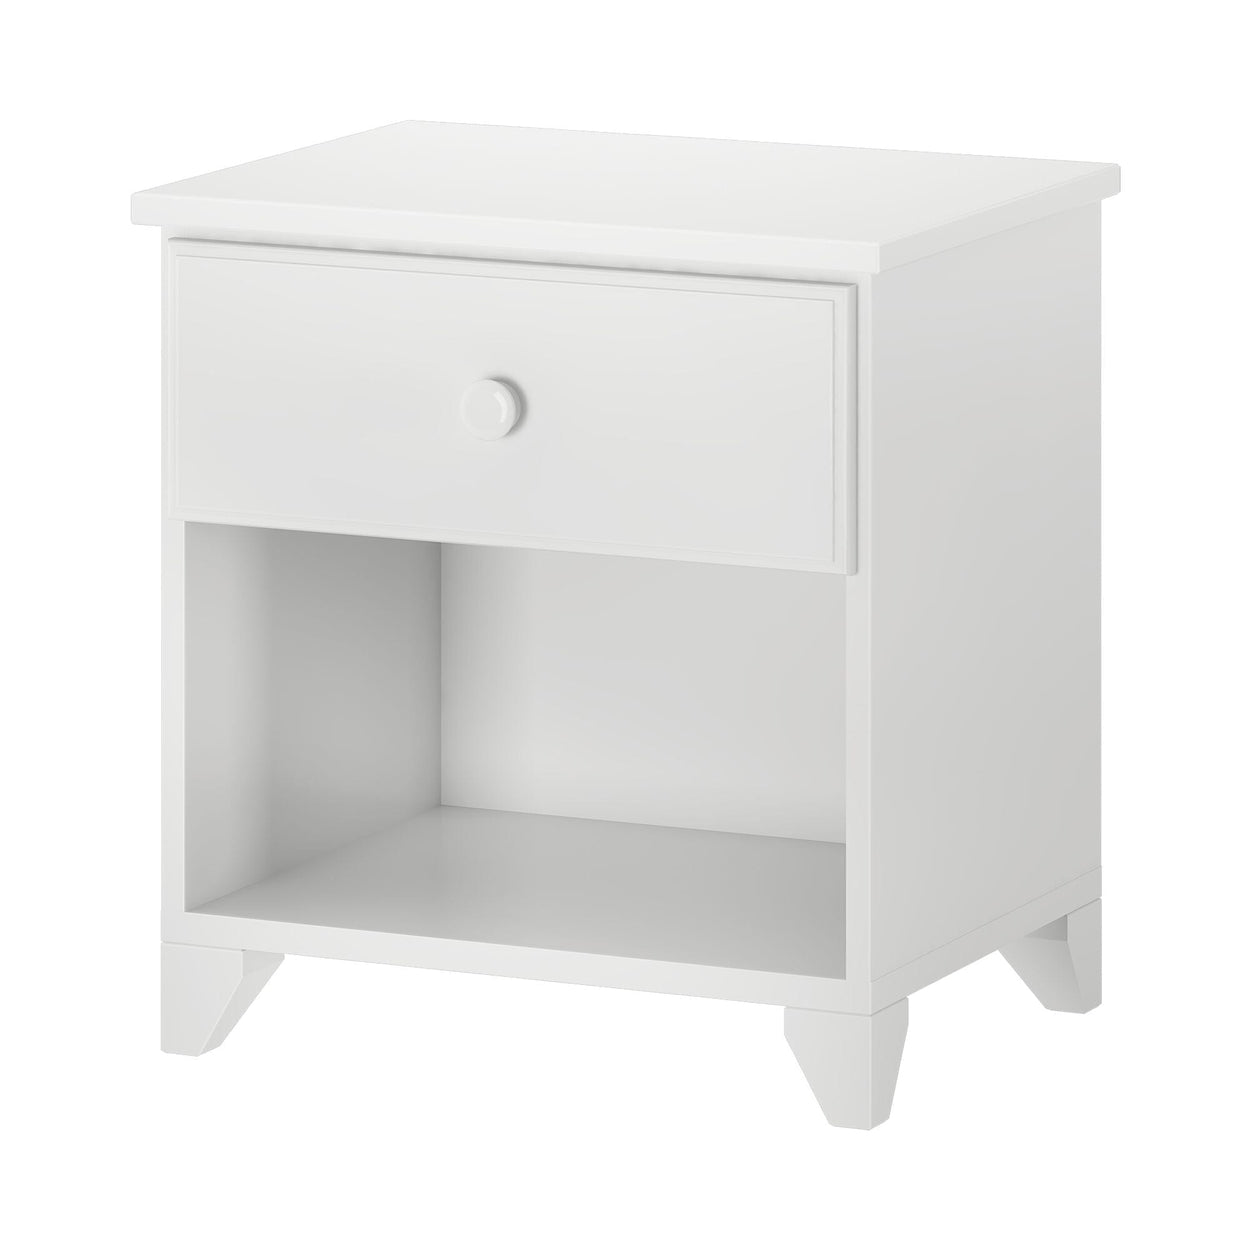 180011-002 : Furniture Nightstand with 1 Drawer, White